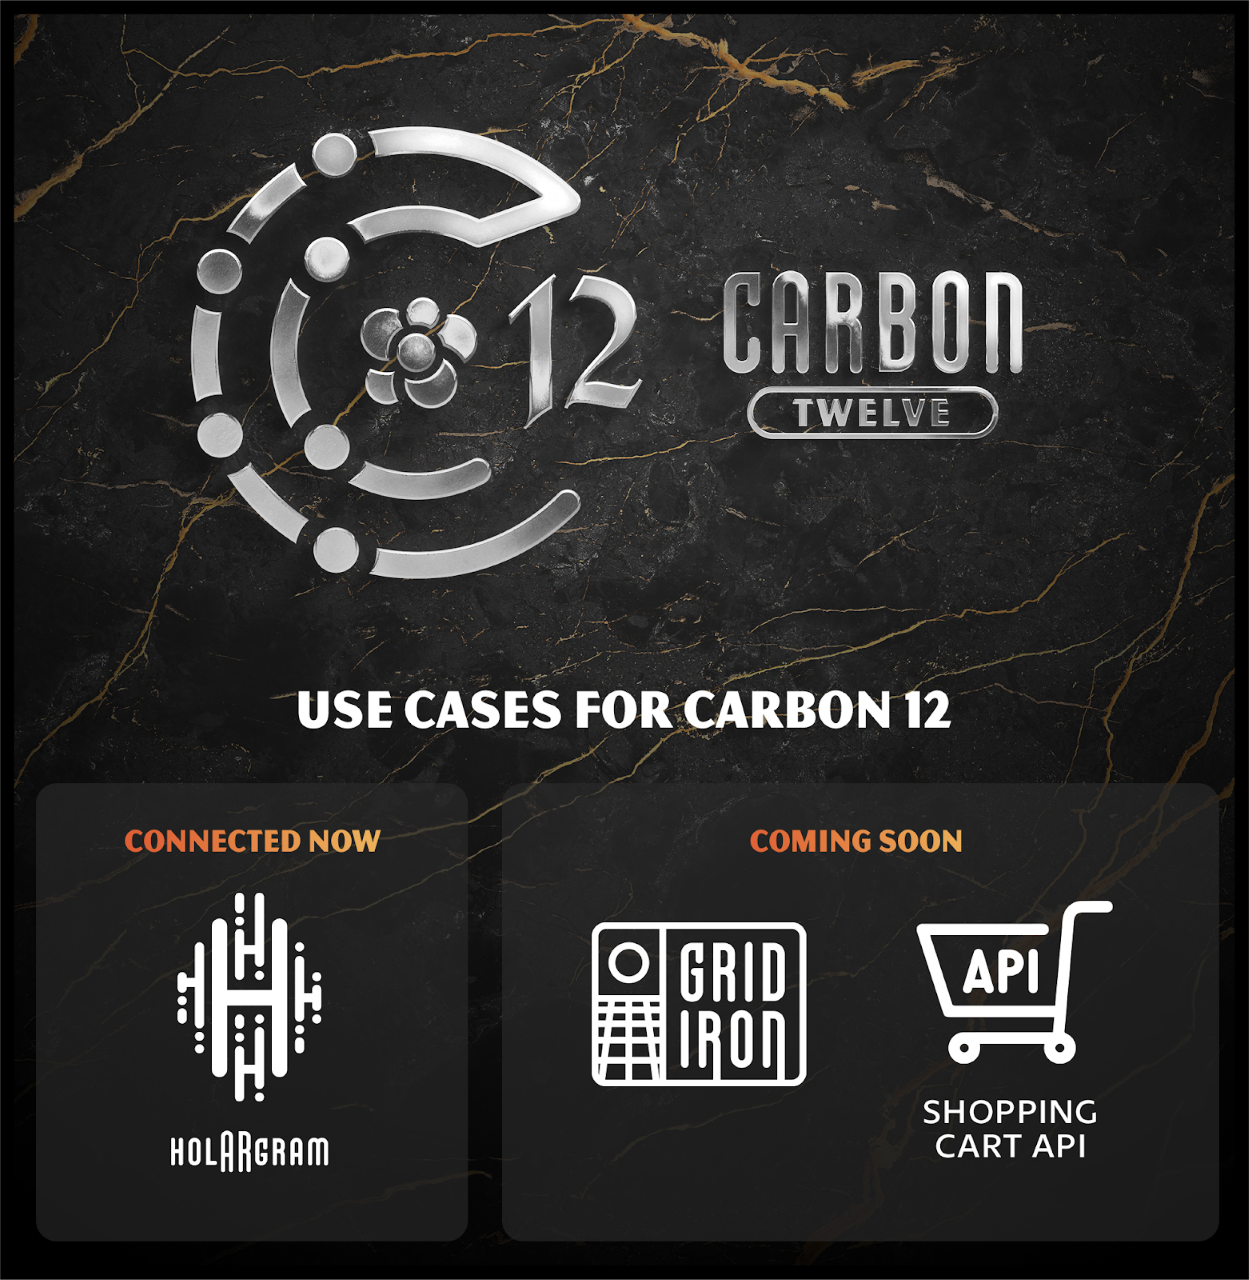 Carbon12 – The new reserve currency for Christians